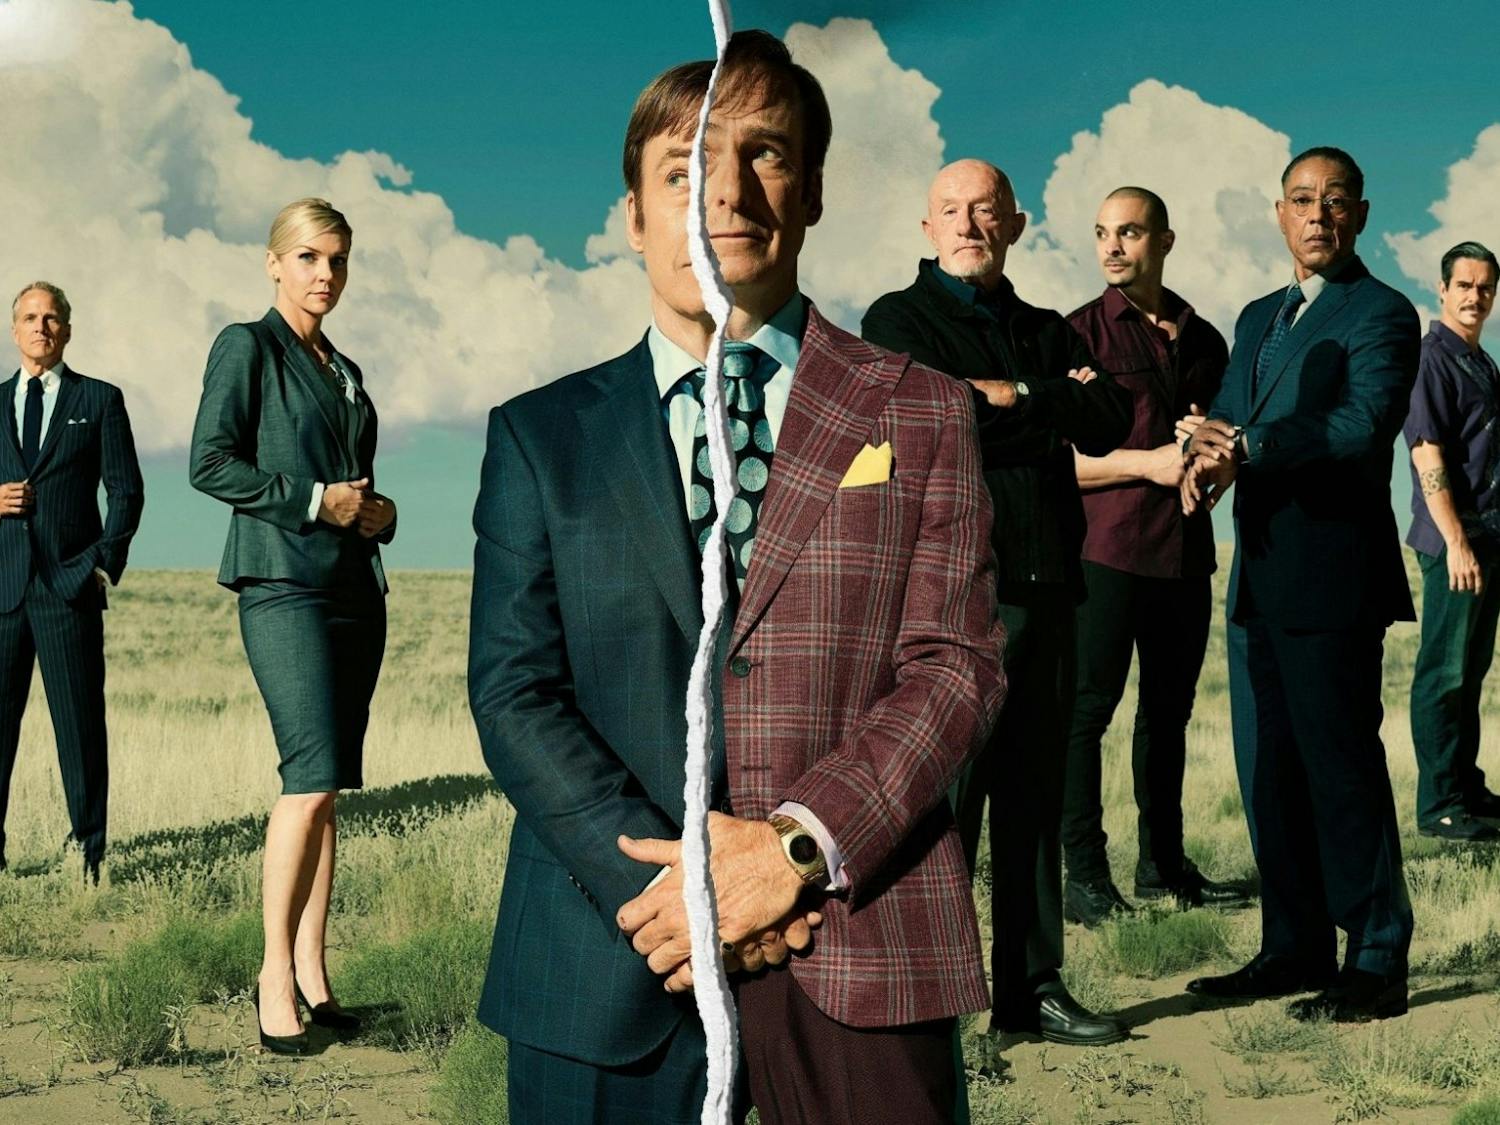 Season 5 of “Better Call Saul” was released on Netflix on April 4, 2022.